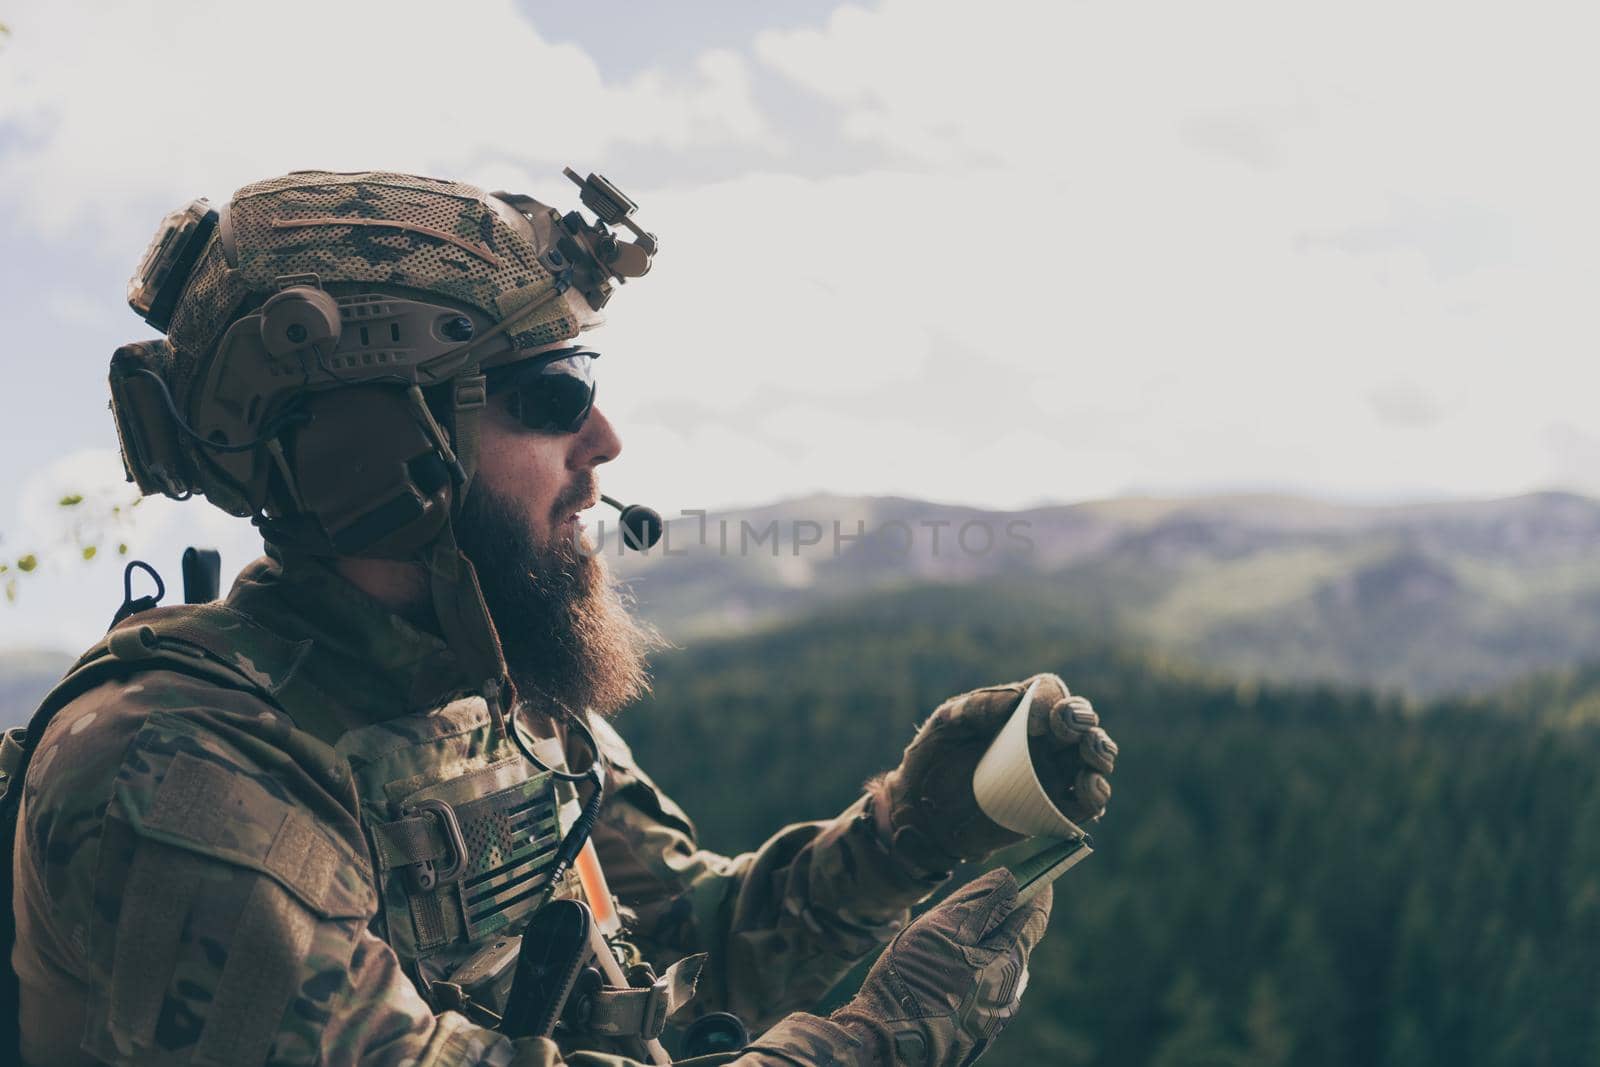 War concept. Bearded soldier in uniform of special forces in dangerous military action in dangerous enemy area studies attack tactics. Selective focus. High-quality photo